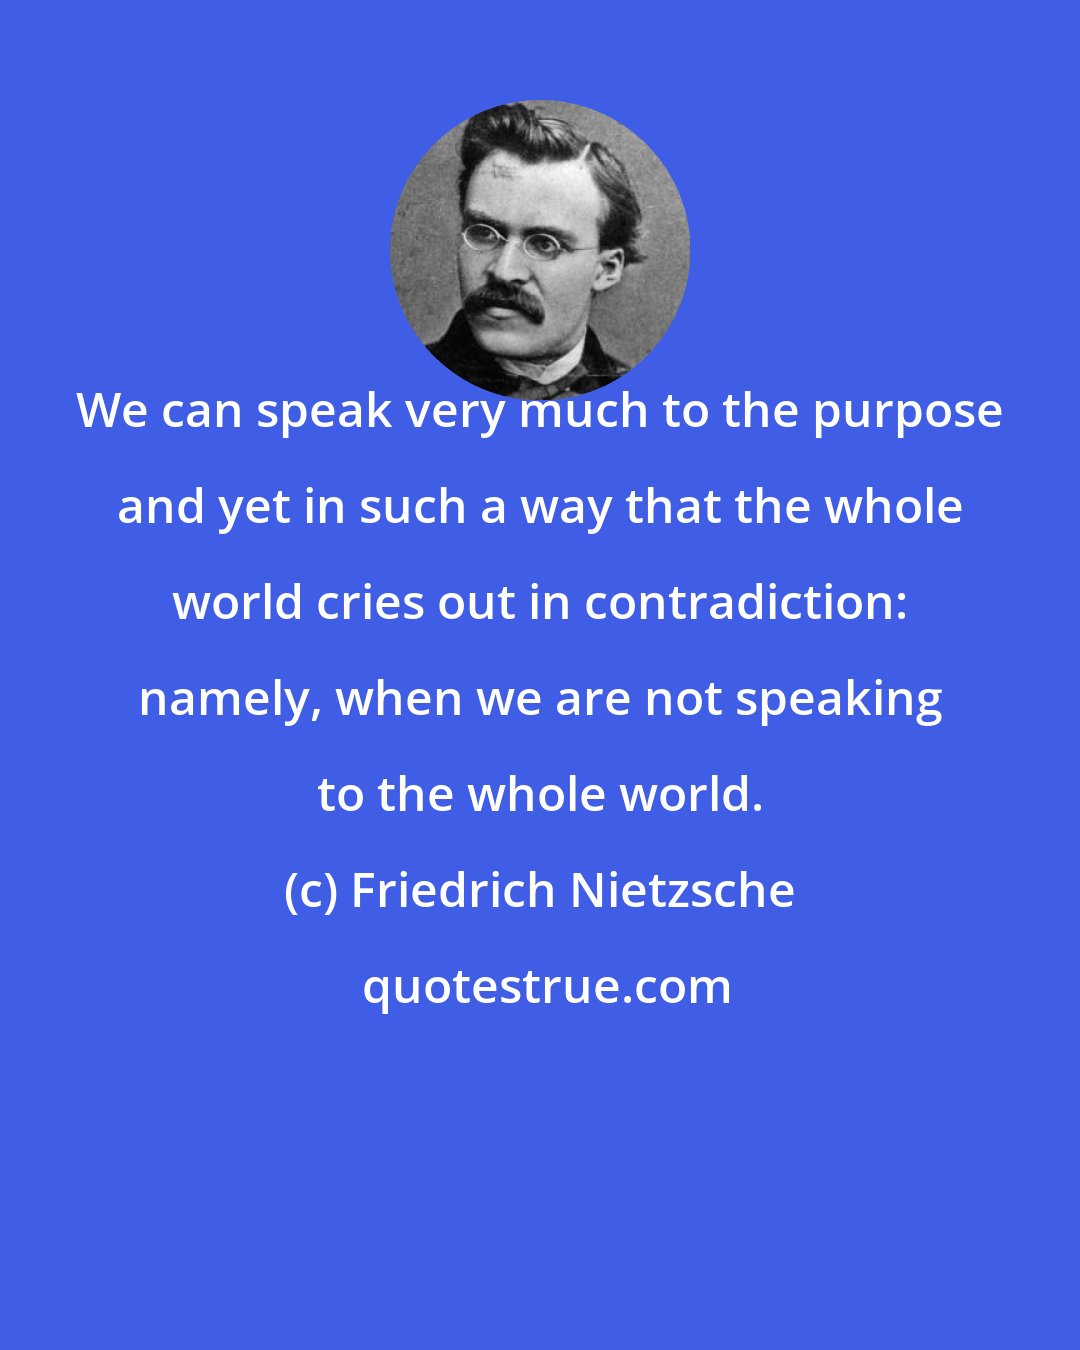 Friedrich Nietzsche: We can speak very much to the purpose and yet in such a way that the whole world cries out in contradiction: namely, when we are not speaking to the whole world.